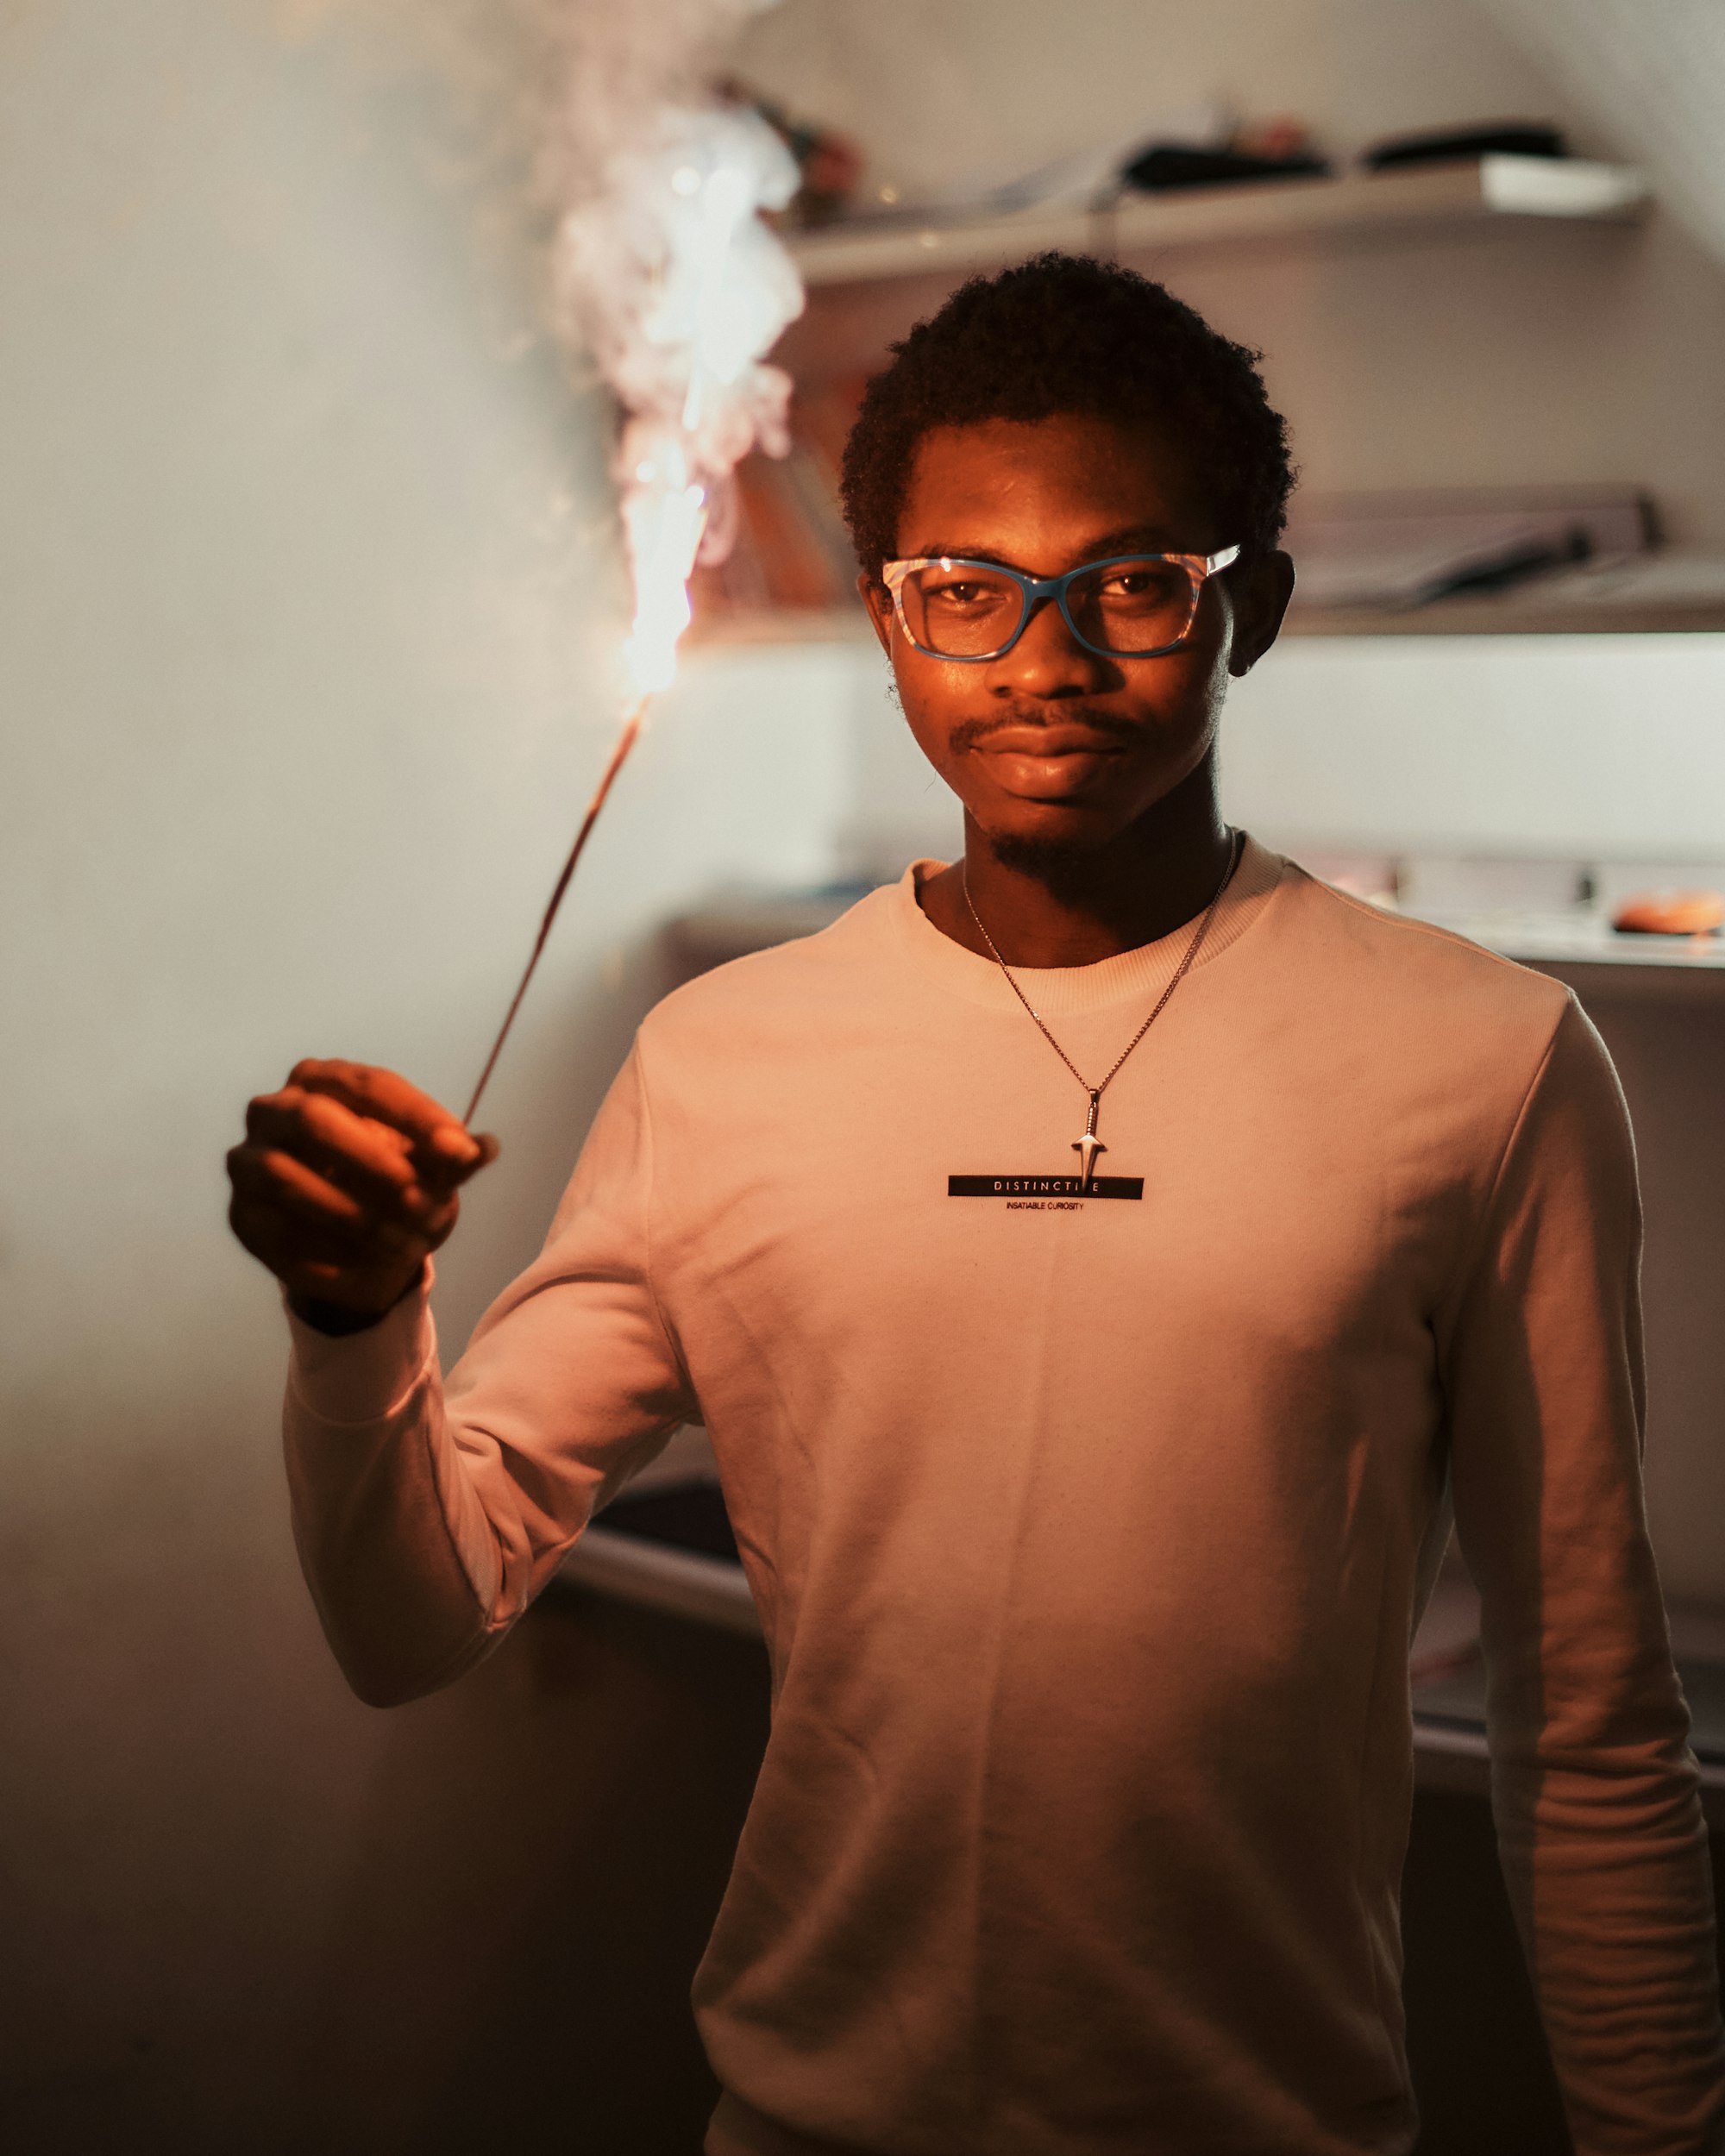 Black African man holding a sparkler to celebrate the new year.